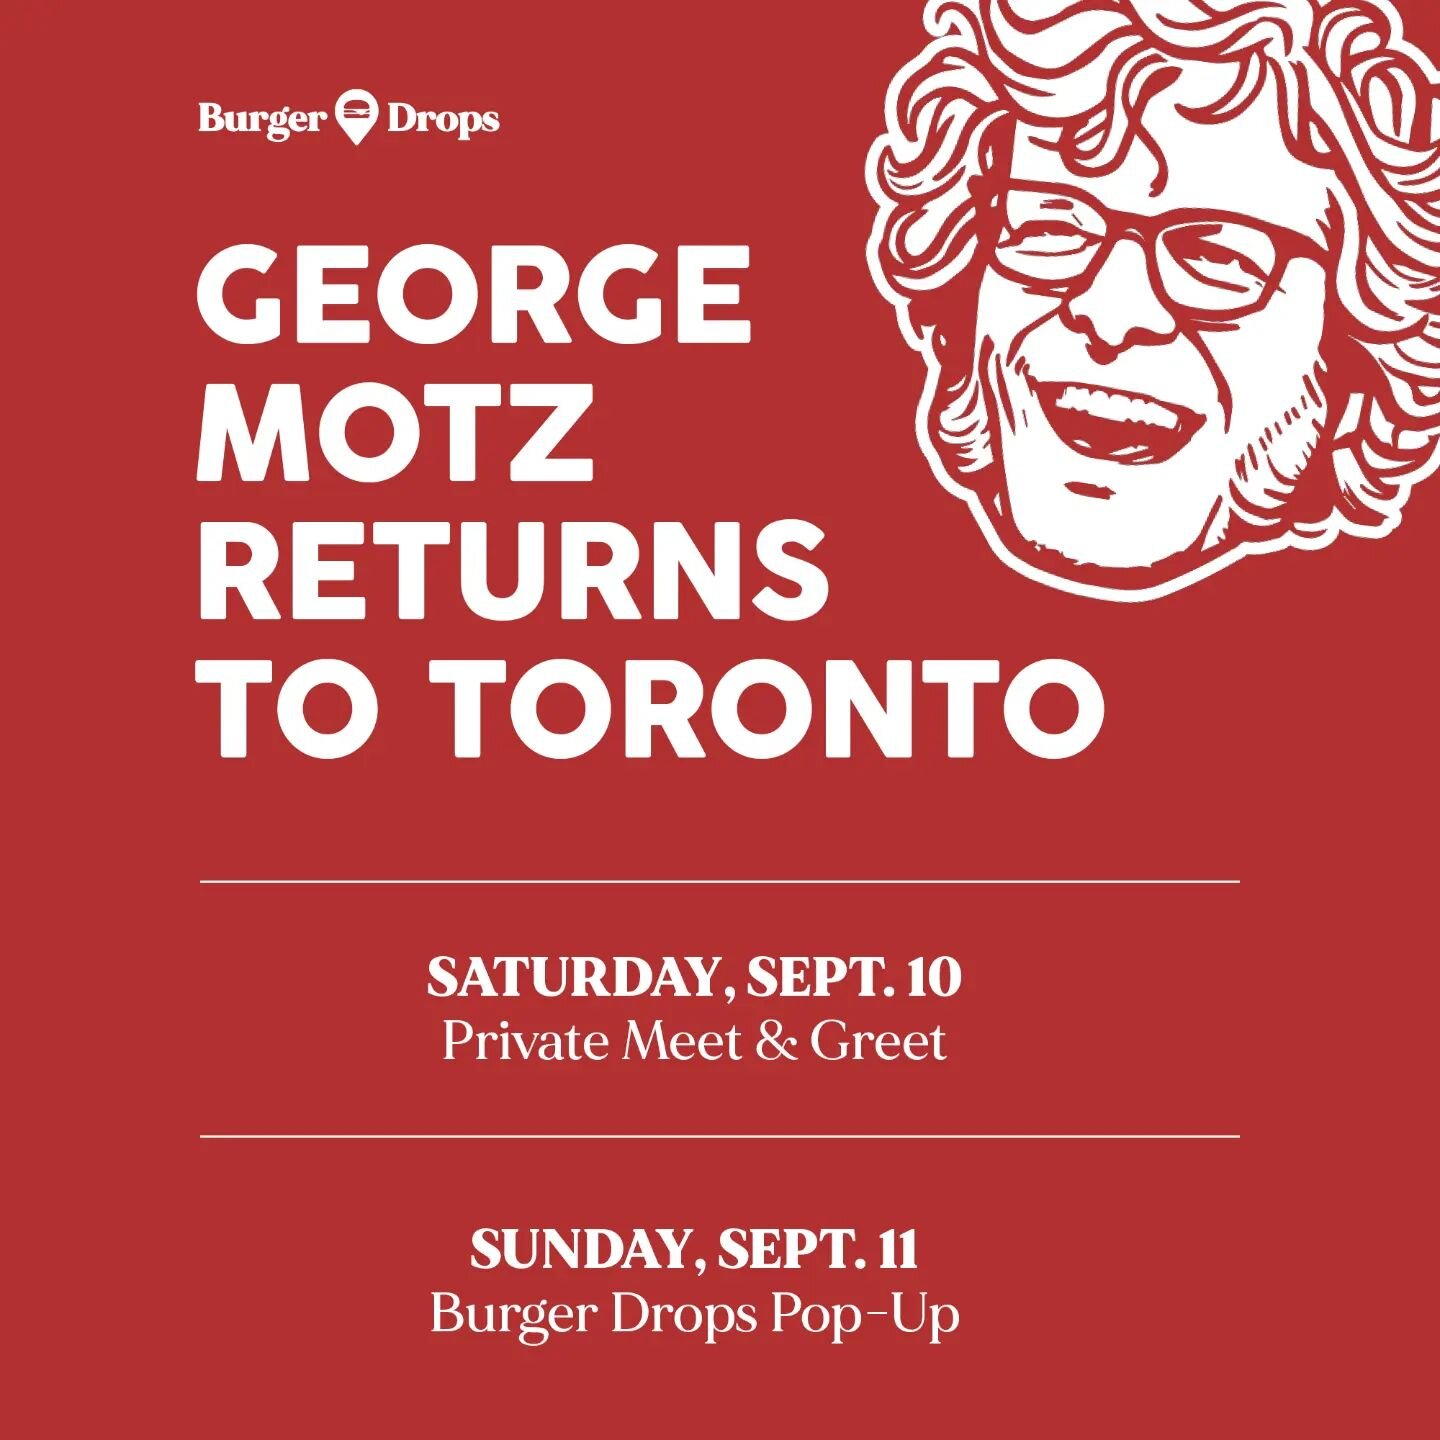 Heading BACK to TORONTO, FINALLY!! My good friends at @burgerdrops are hosting a 2-day extravaganza NEXT WEEKEND at their location and I couldn't be more excited to get back to Canada (been too long). We've planned 2 events - a meet-n-greet for only 